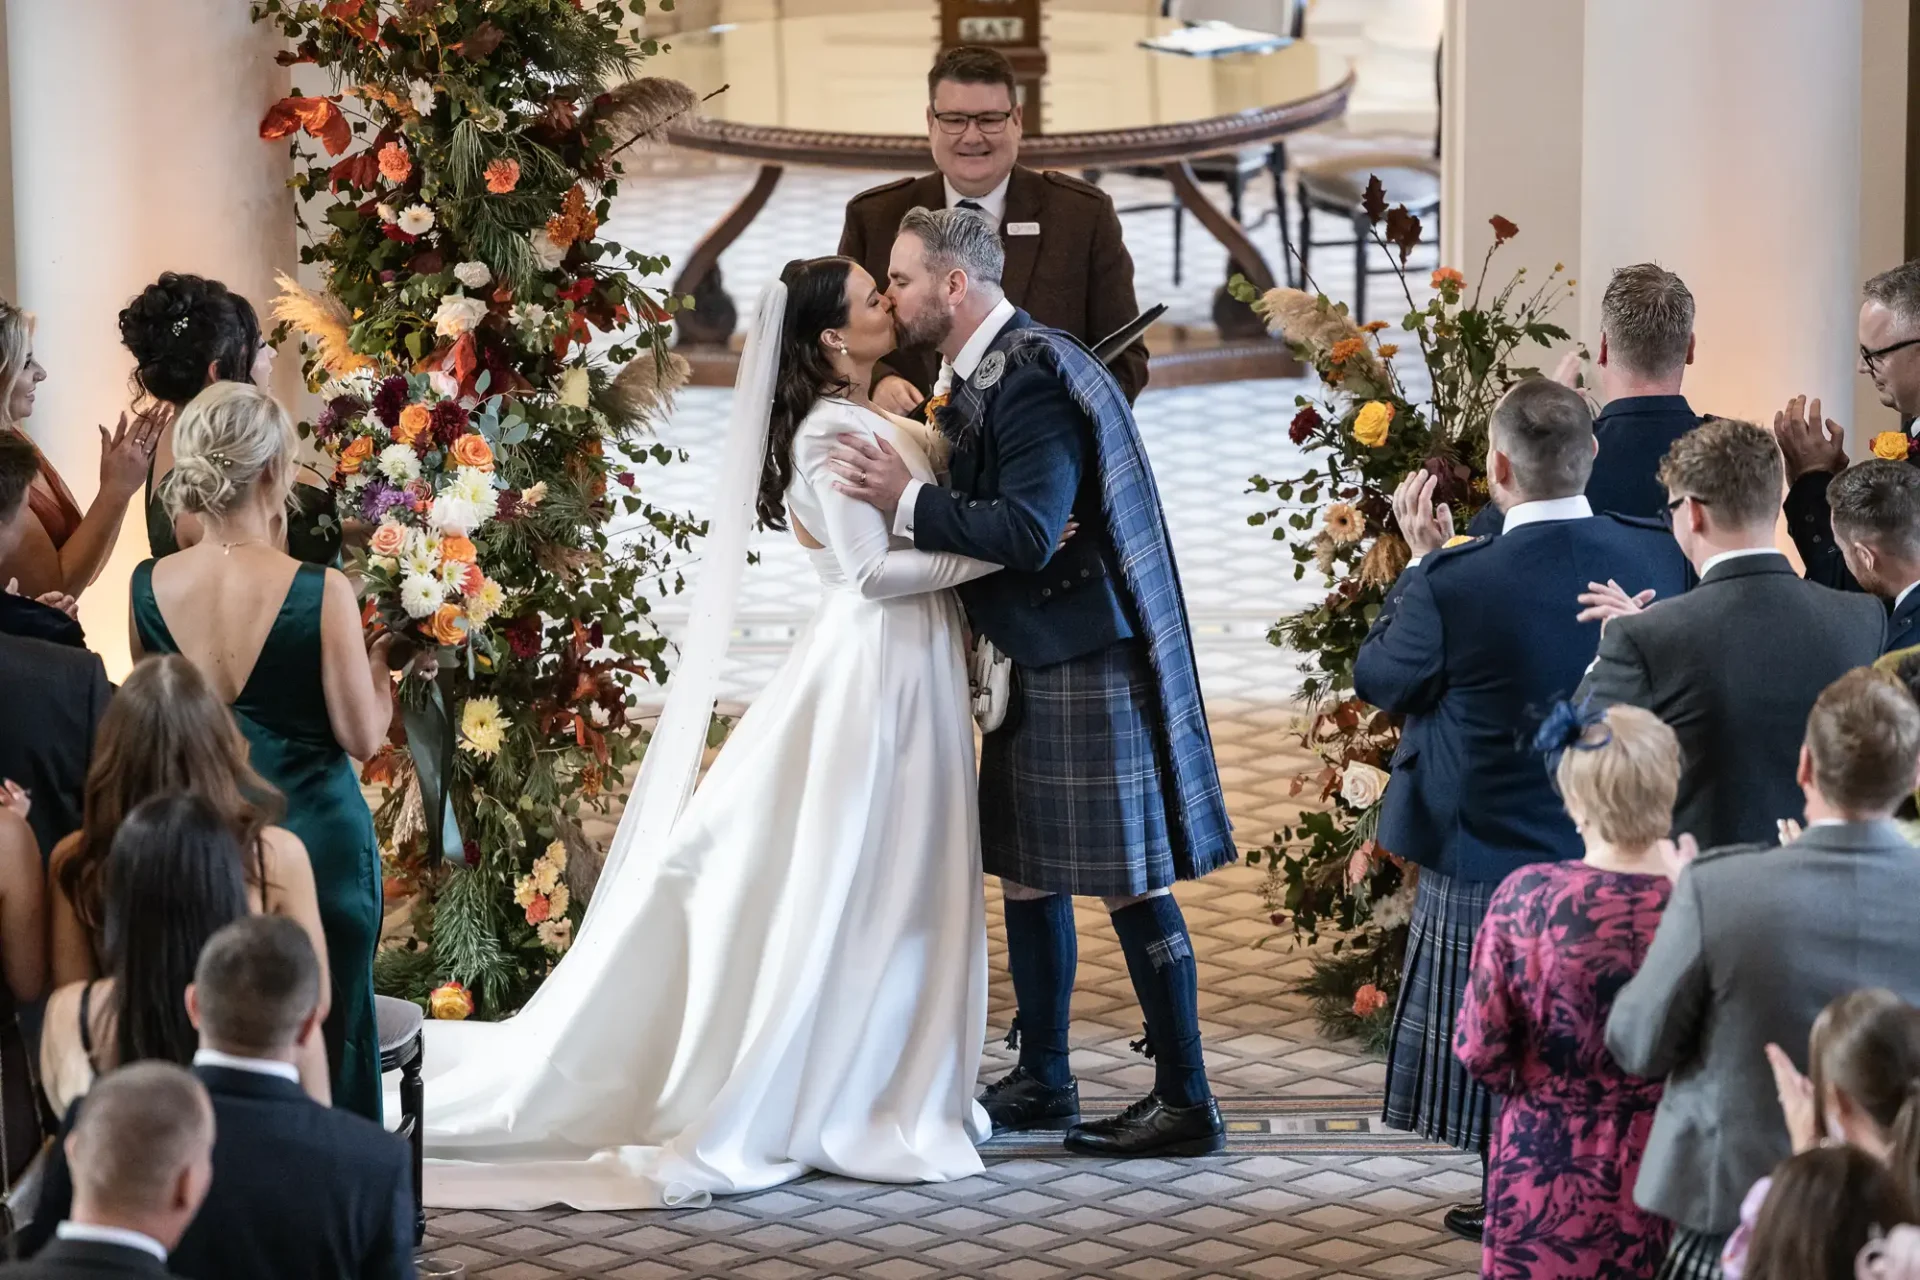 A bride and groom kiss at the altar, surrounded by guests and adorned with vibrant floral arrangements, with a celebrant watching in the background.